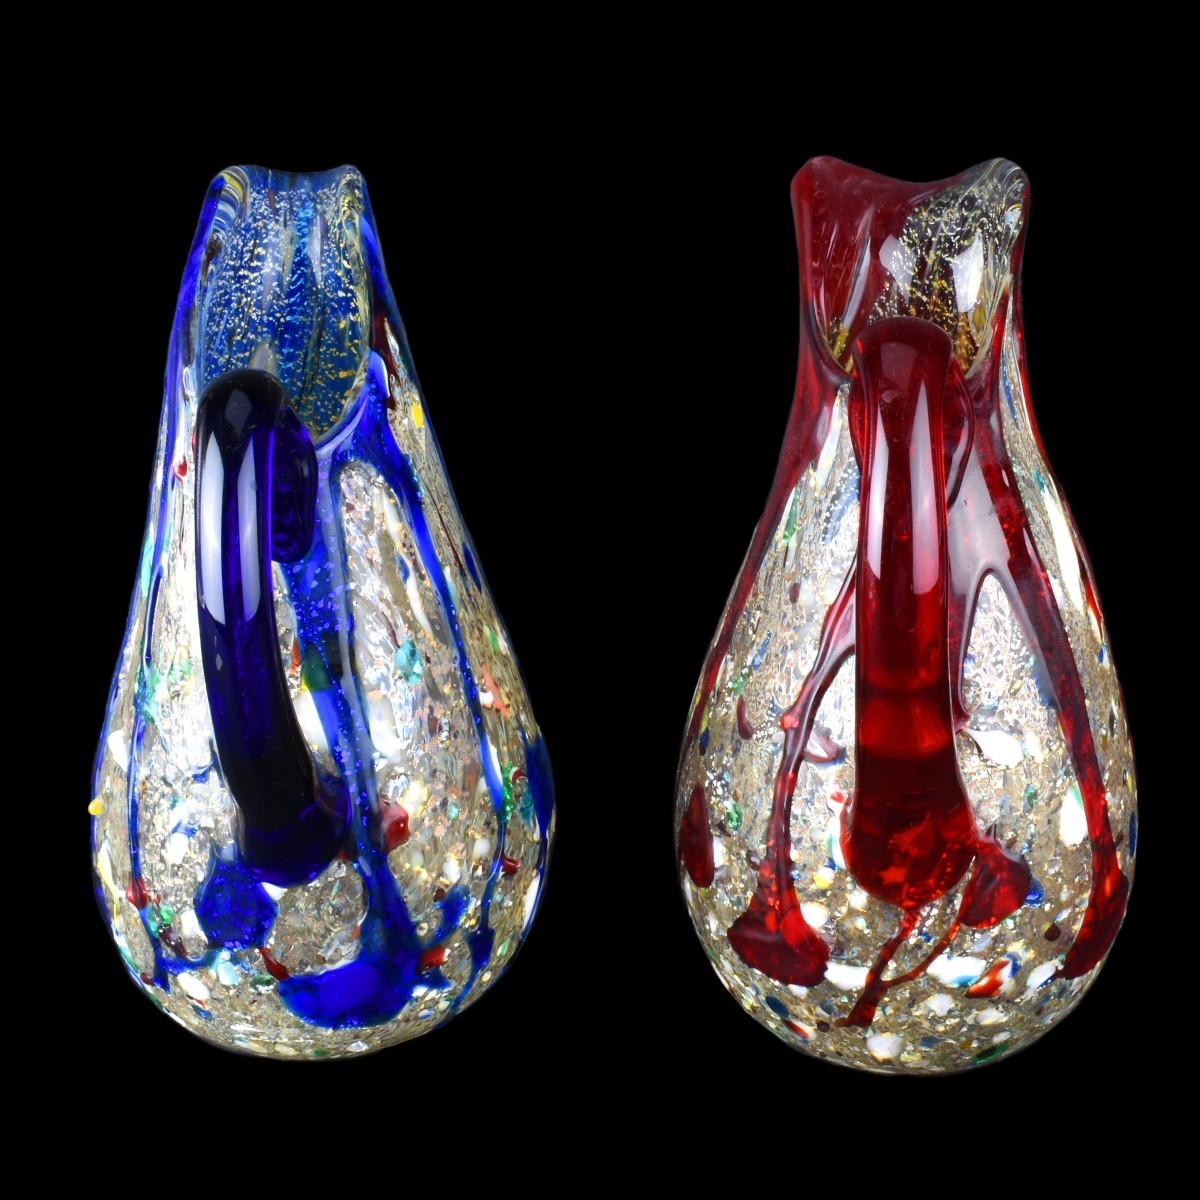 Two (2) Vintage Murano Art Glass Pitchers - Image 3 of 4